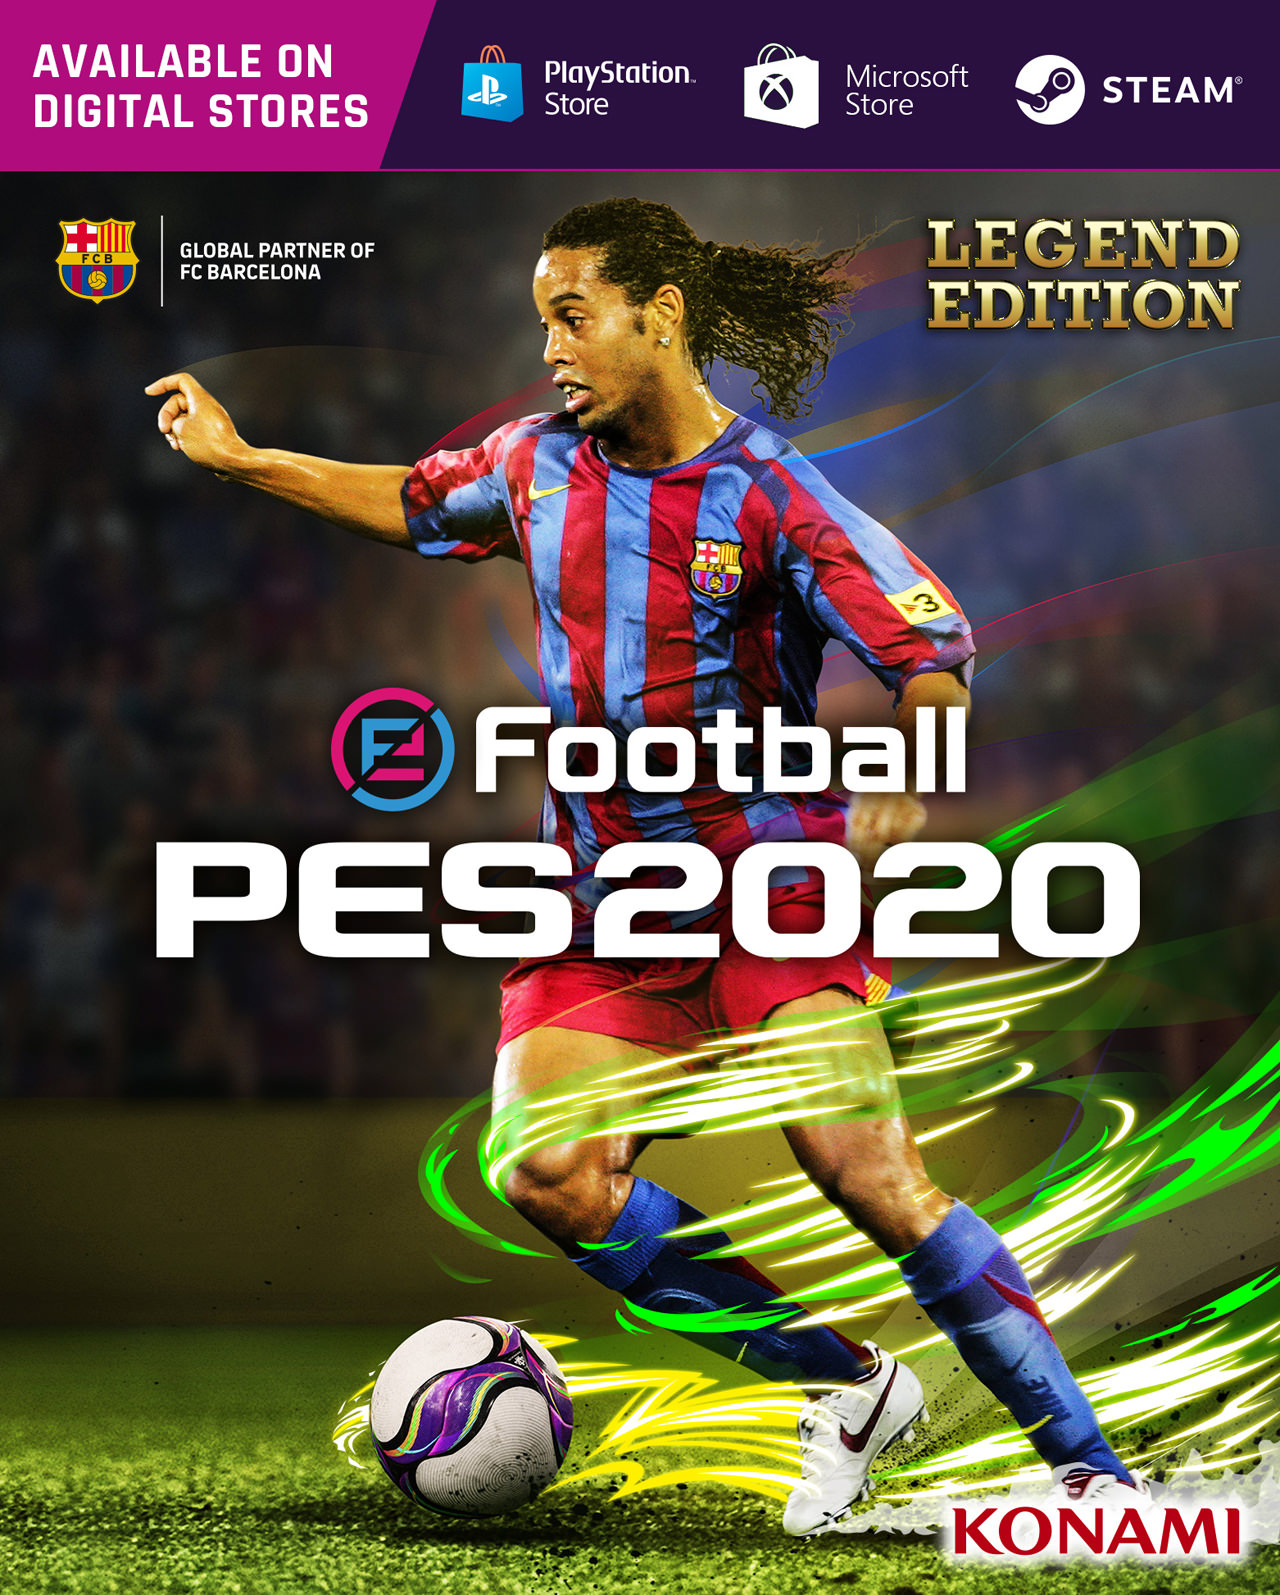 Low Pounding Eccentric PES 2020 Cover – FIFPlay